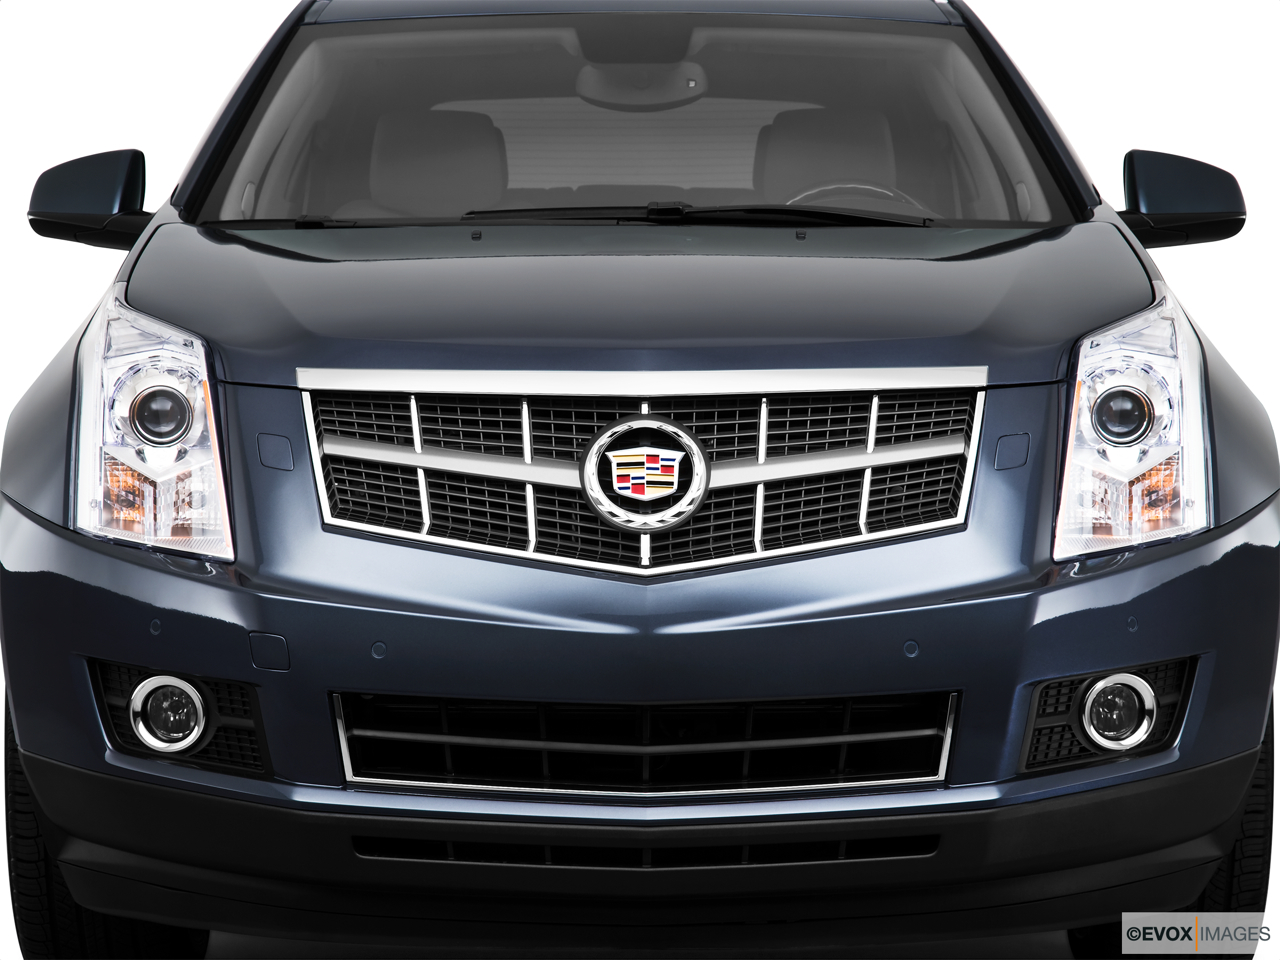 2010 Cadillac SRX Crossover Premium Collection Close up of Grill. 